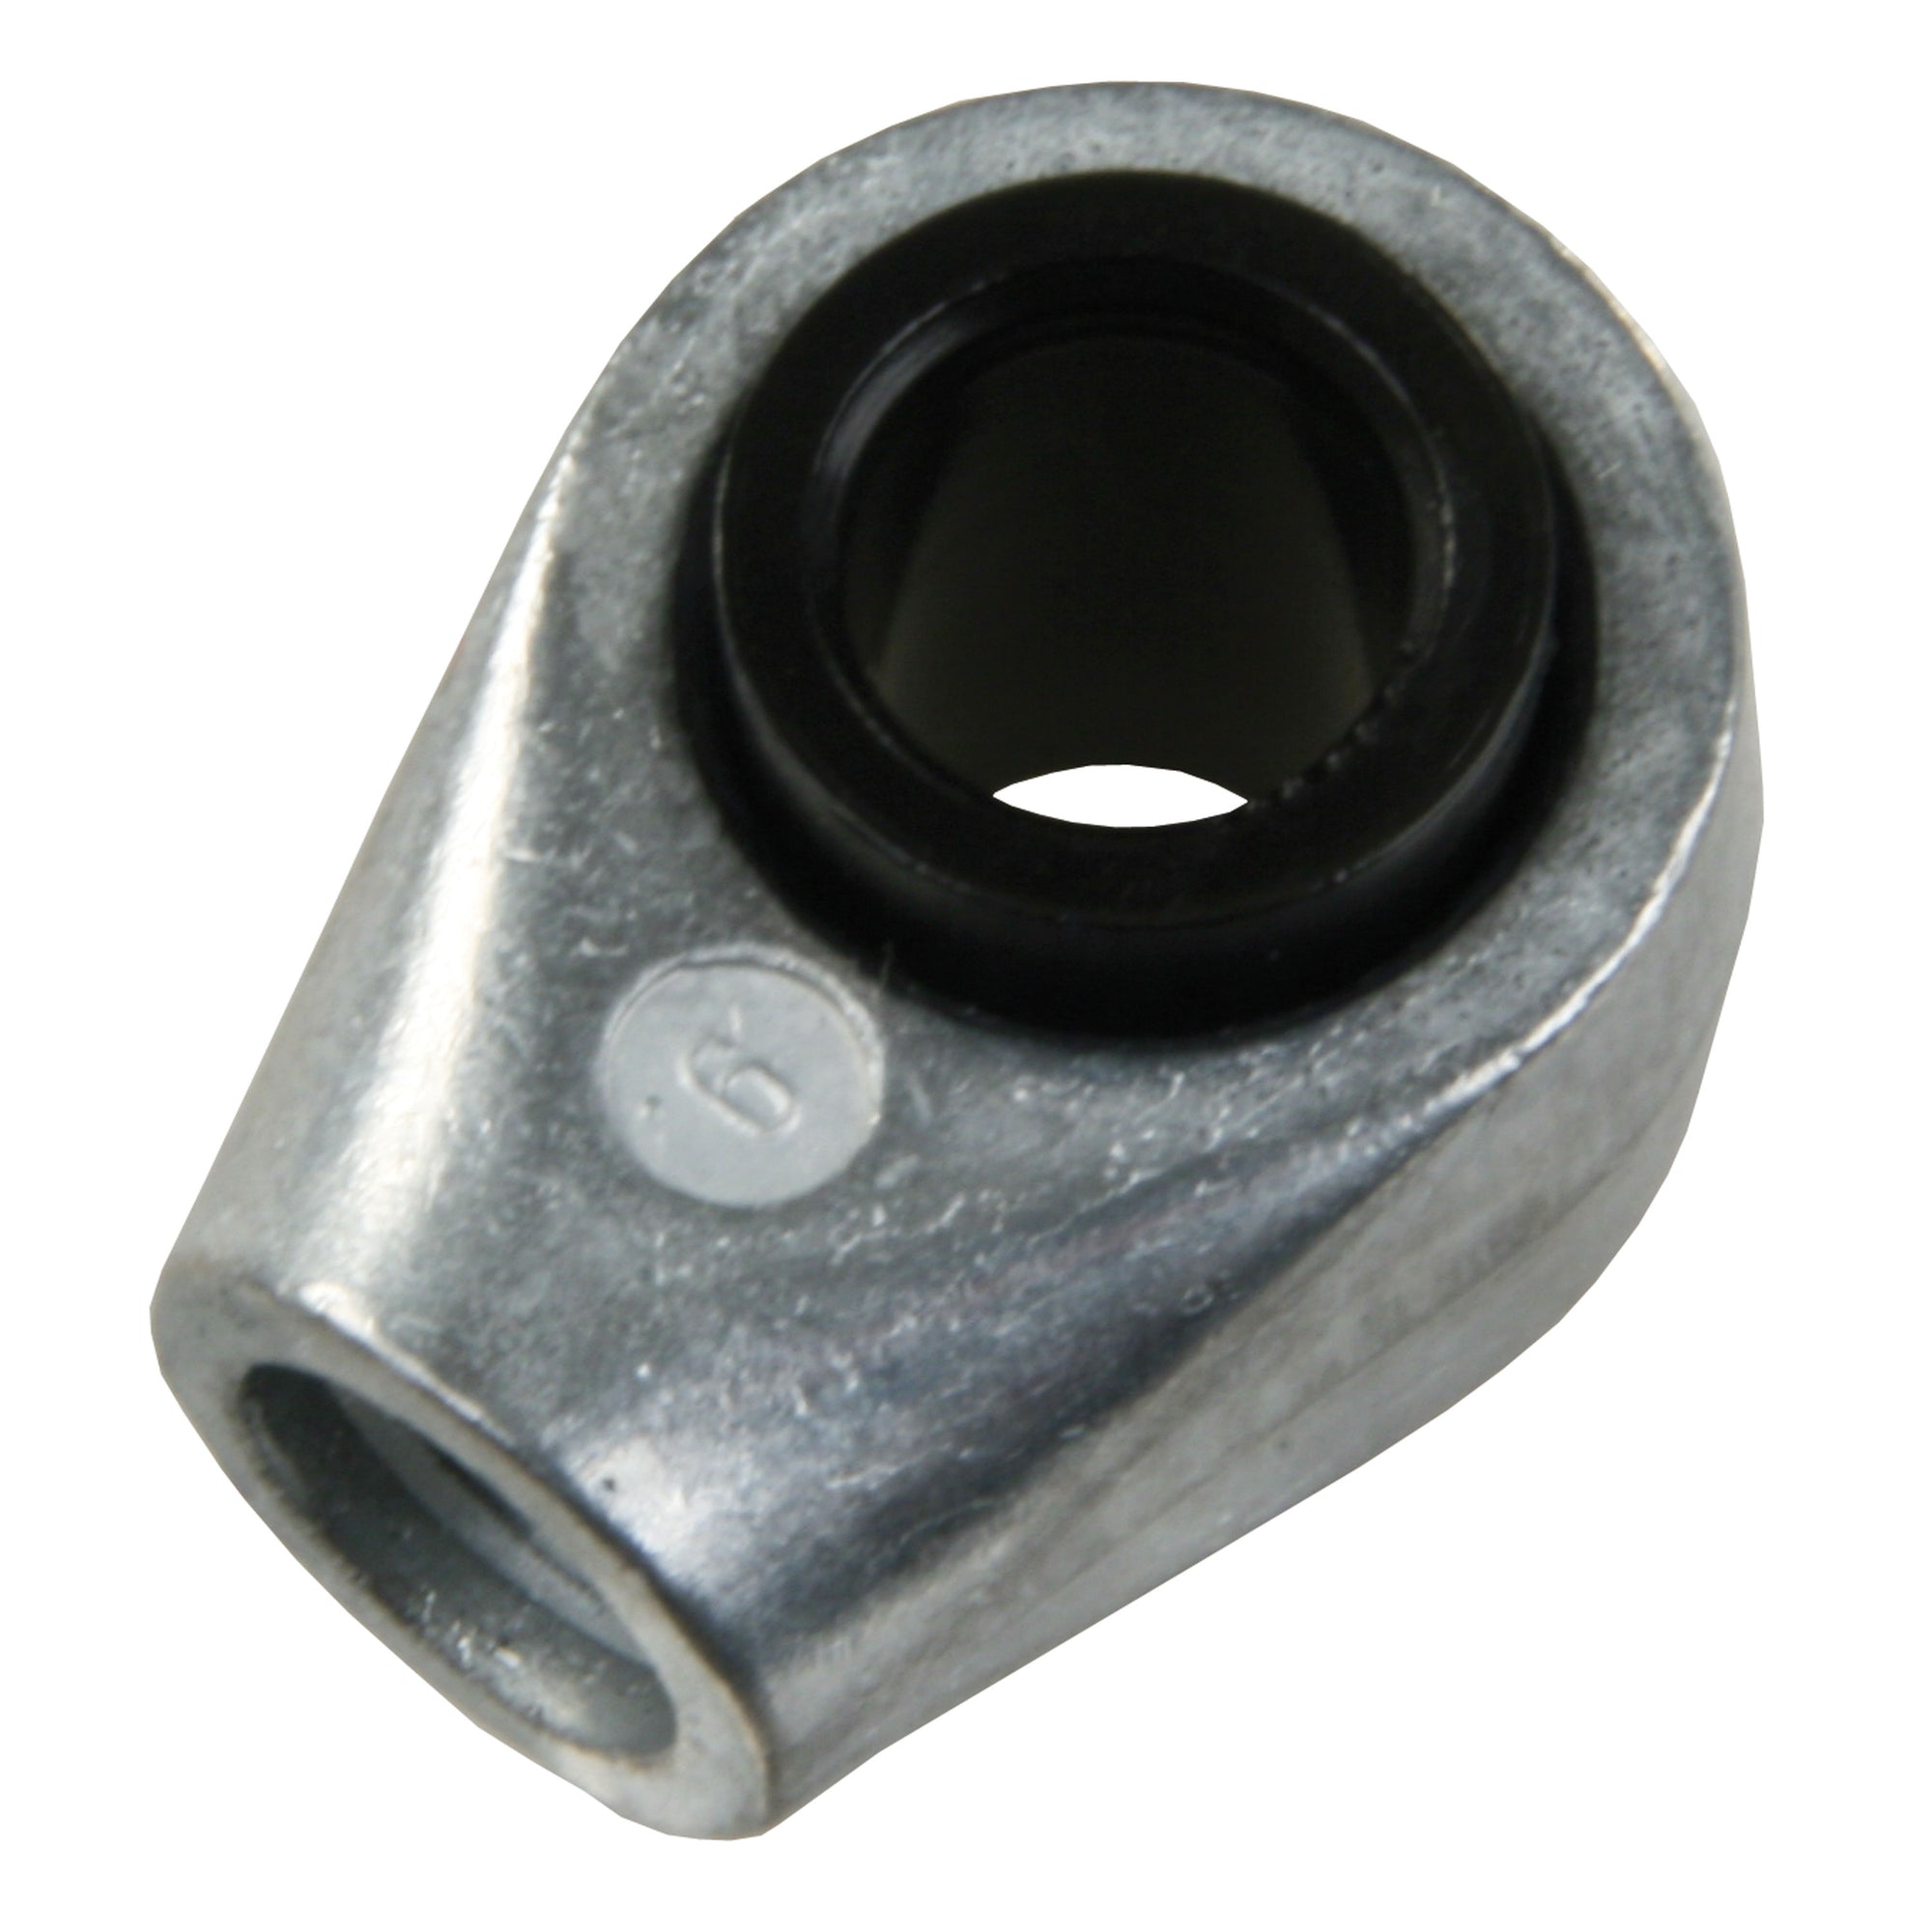 REPLACEMENT END FITTINGS 2 PK